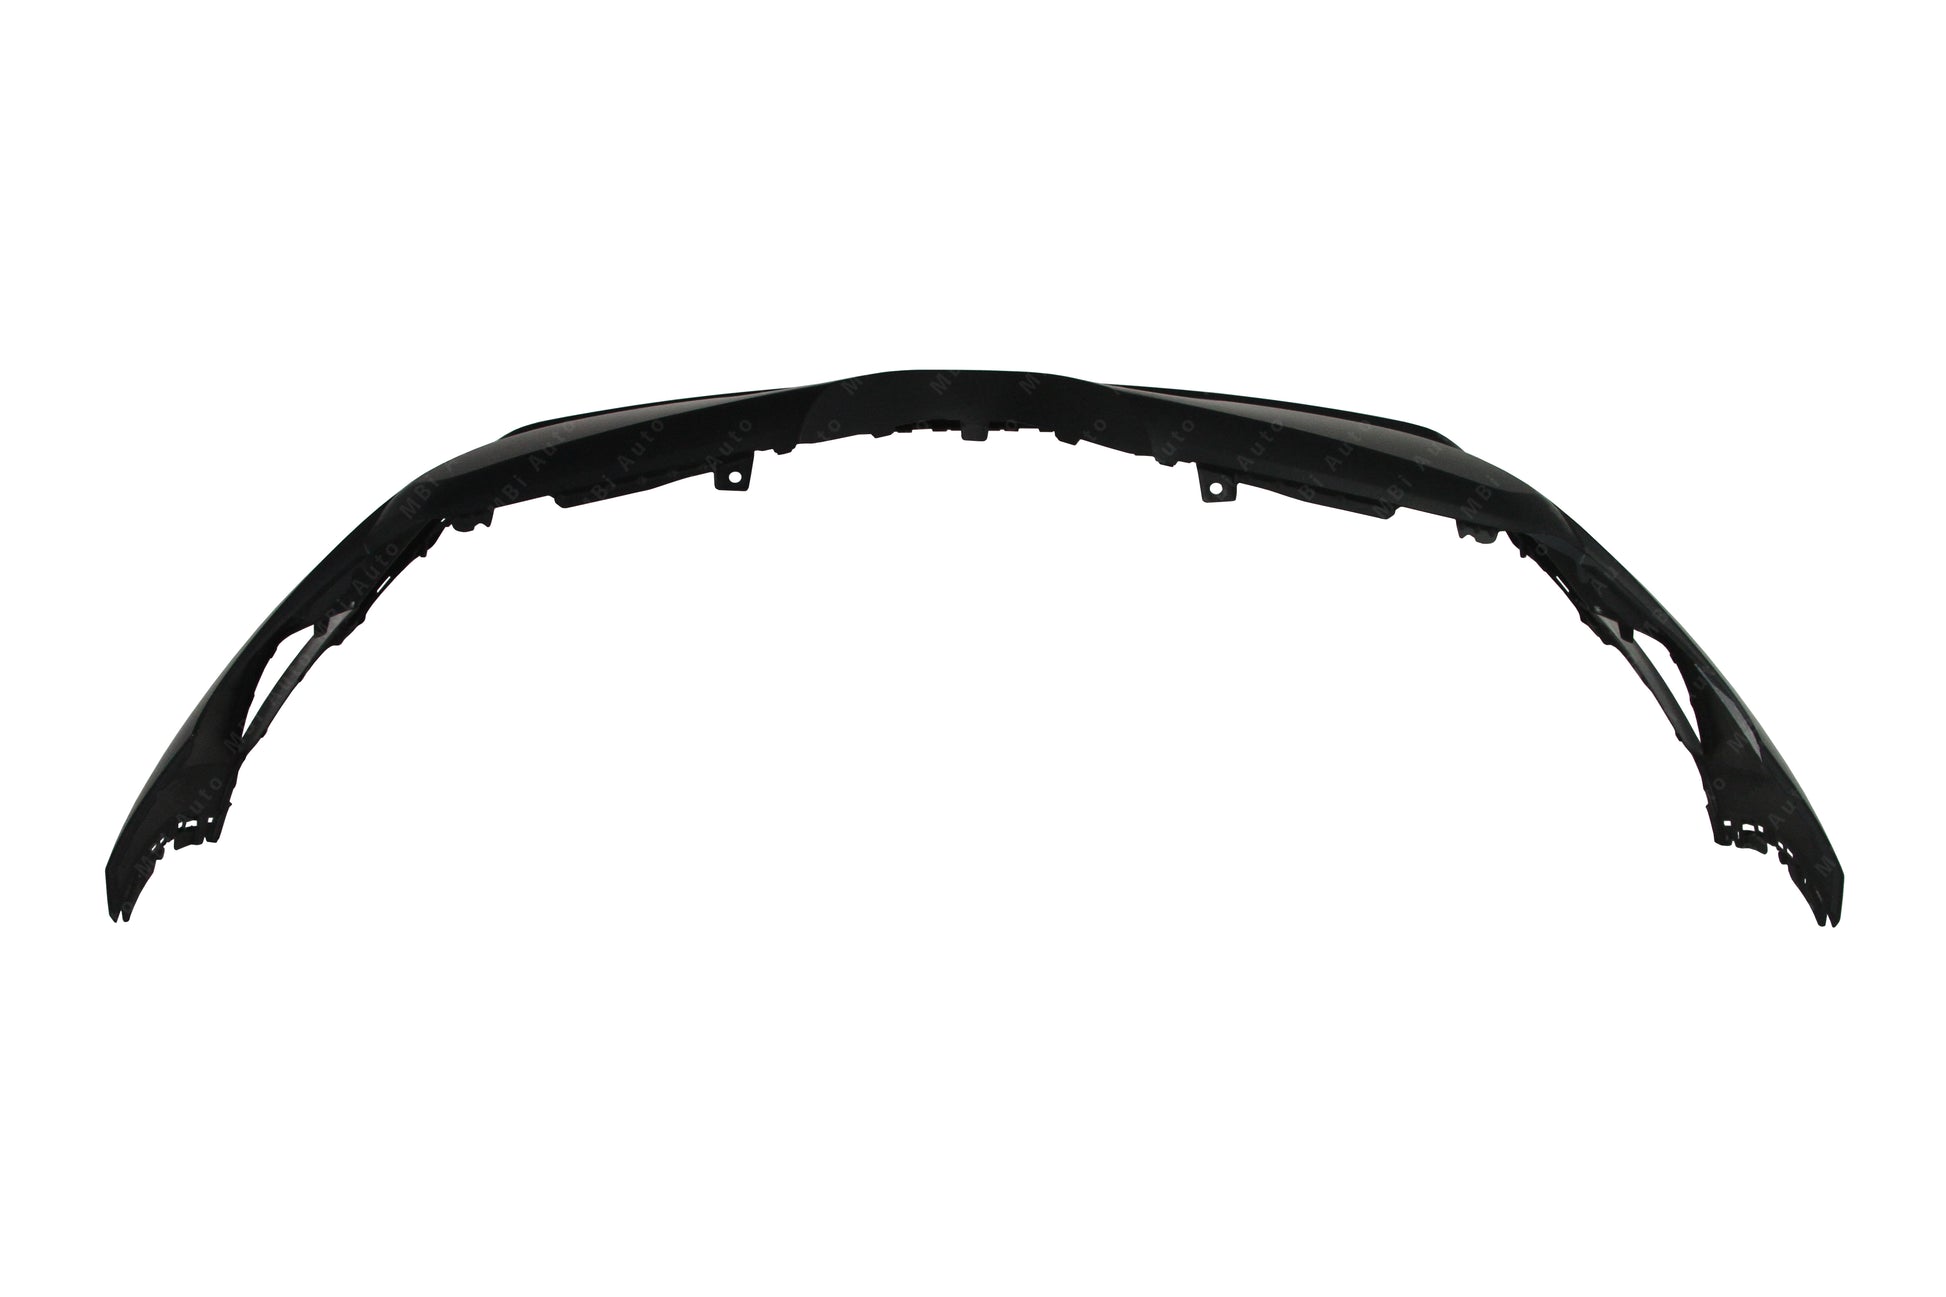 Toyota C-HR 2018 - 2019 Front Upper Bumper Cover 18 - 19 TO1000431 Bumper-King